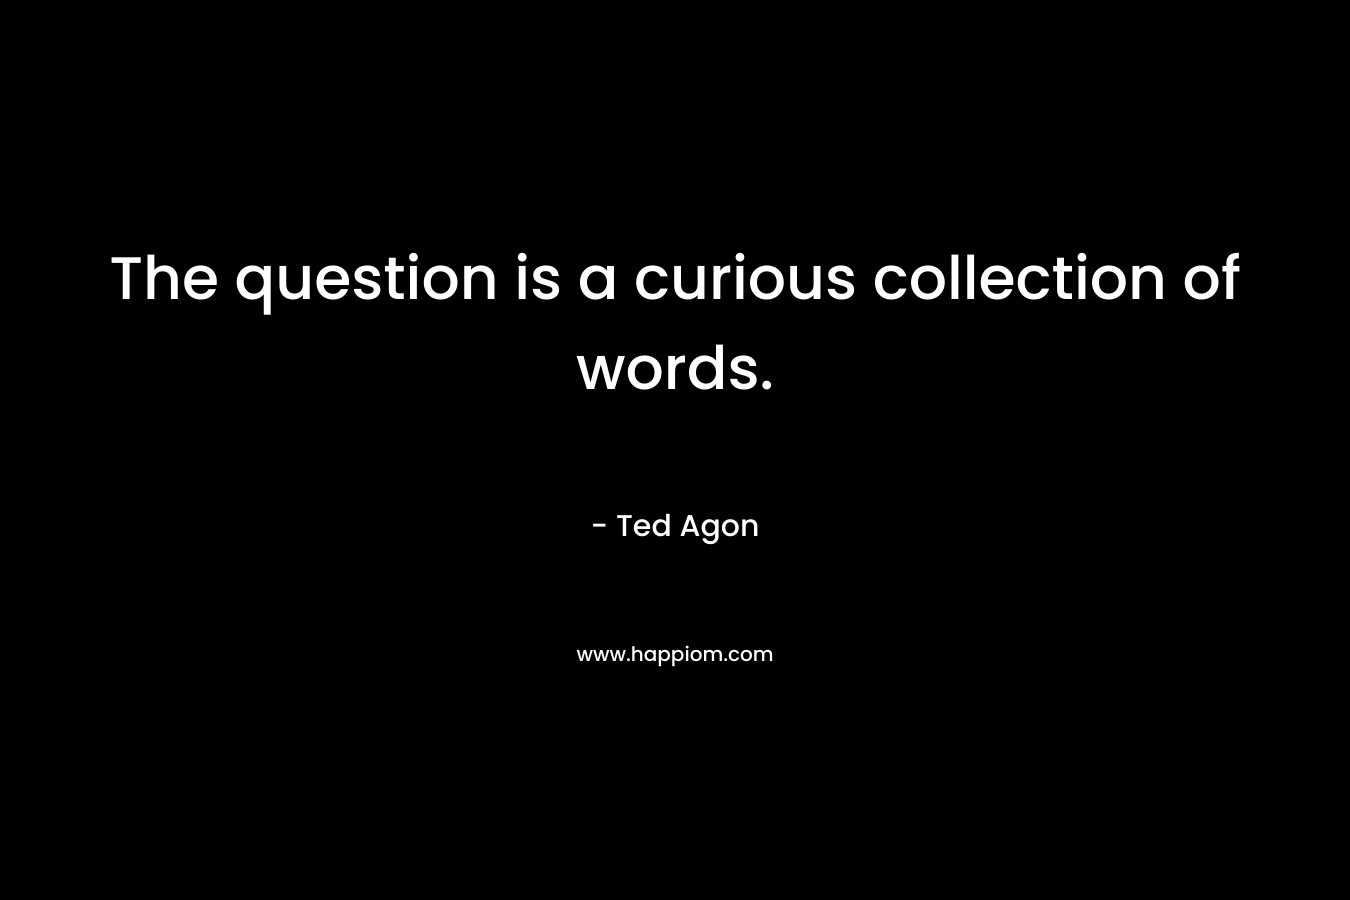 The question is a curious collection of words.